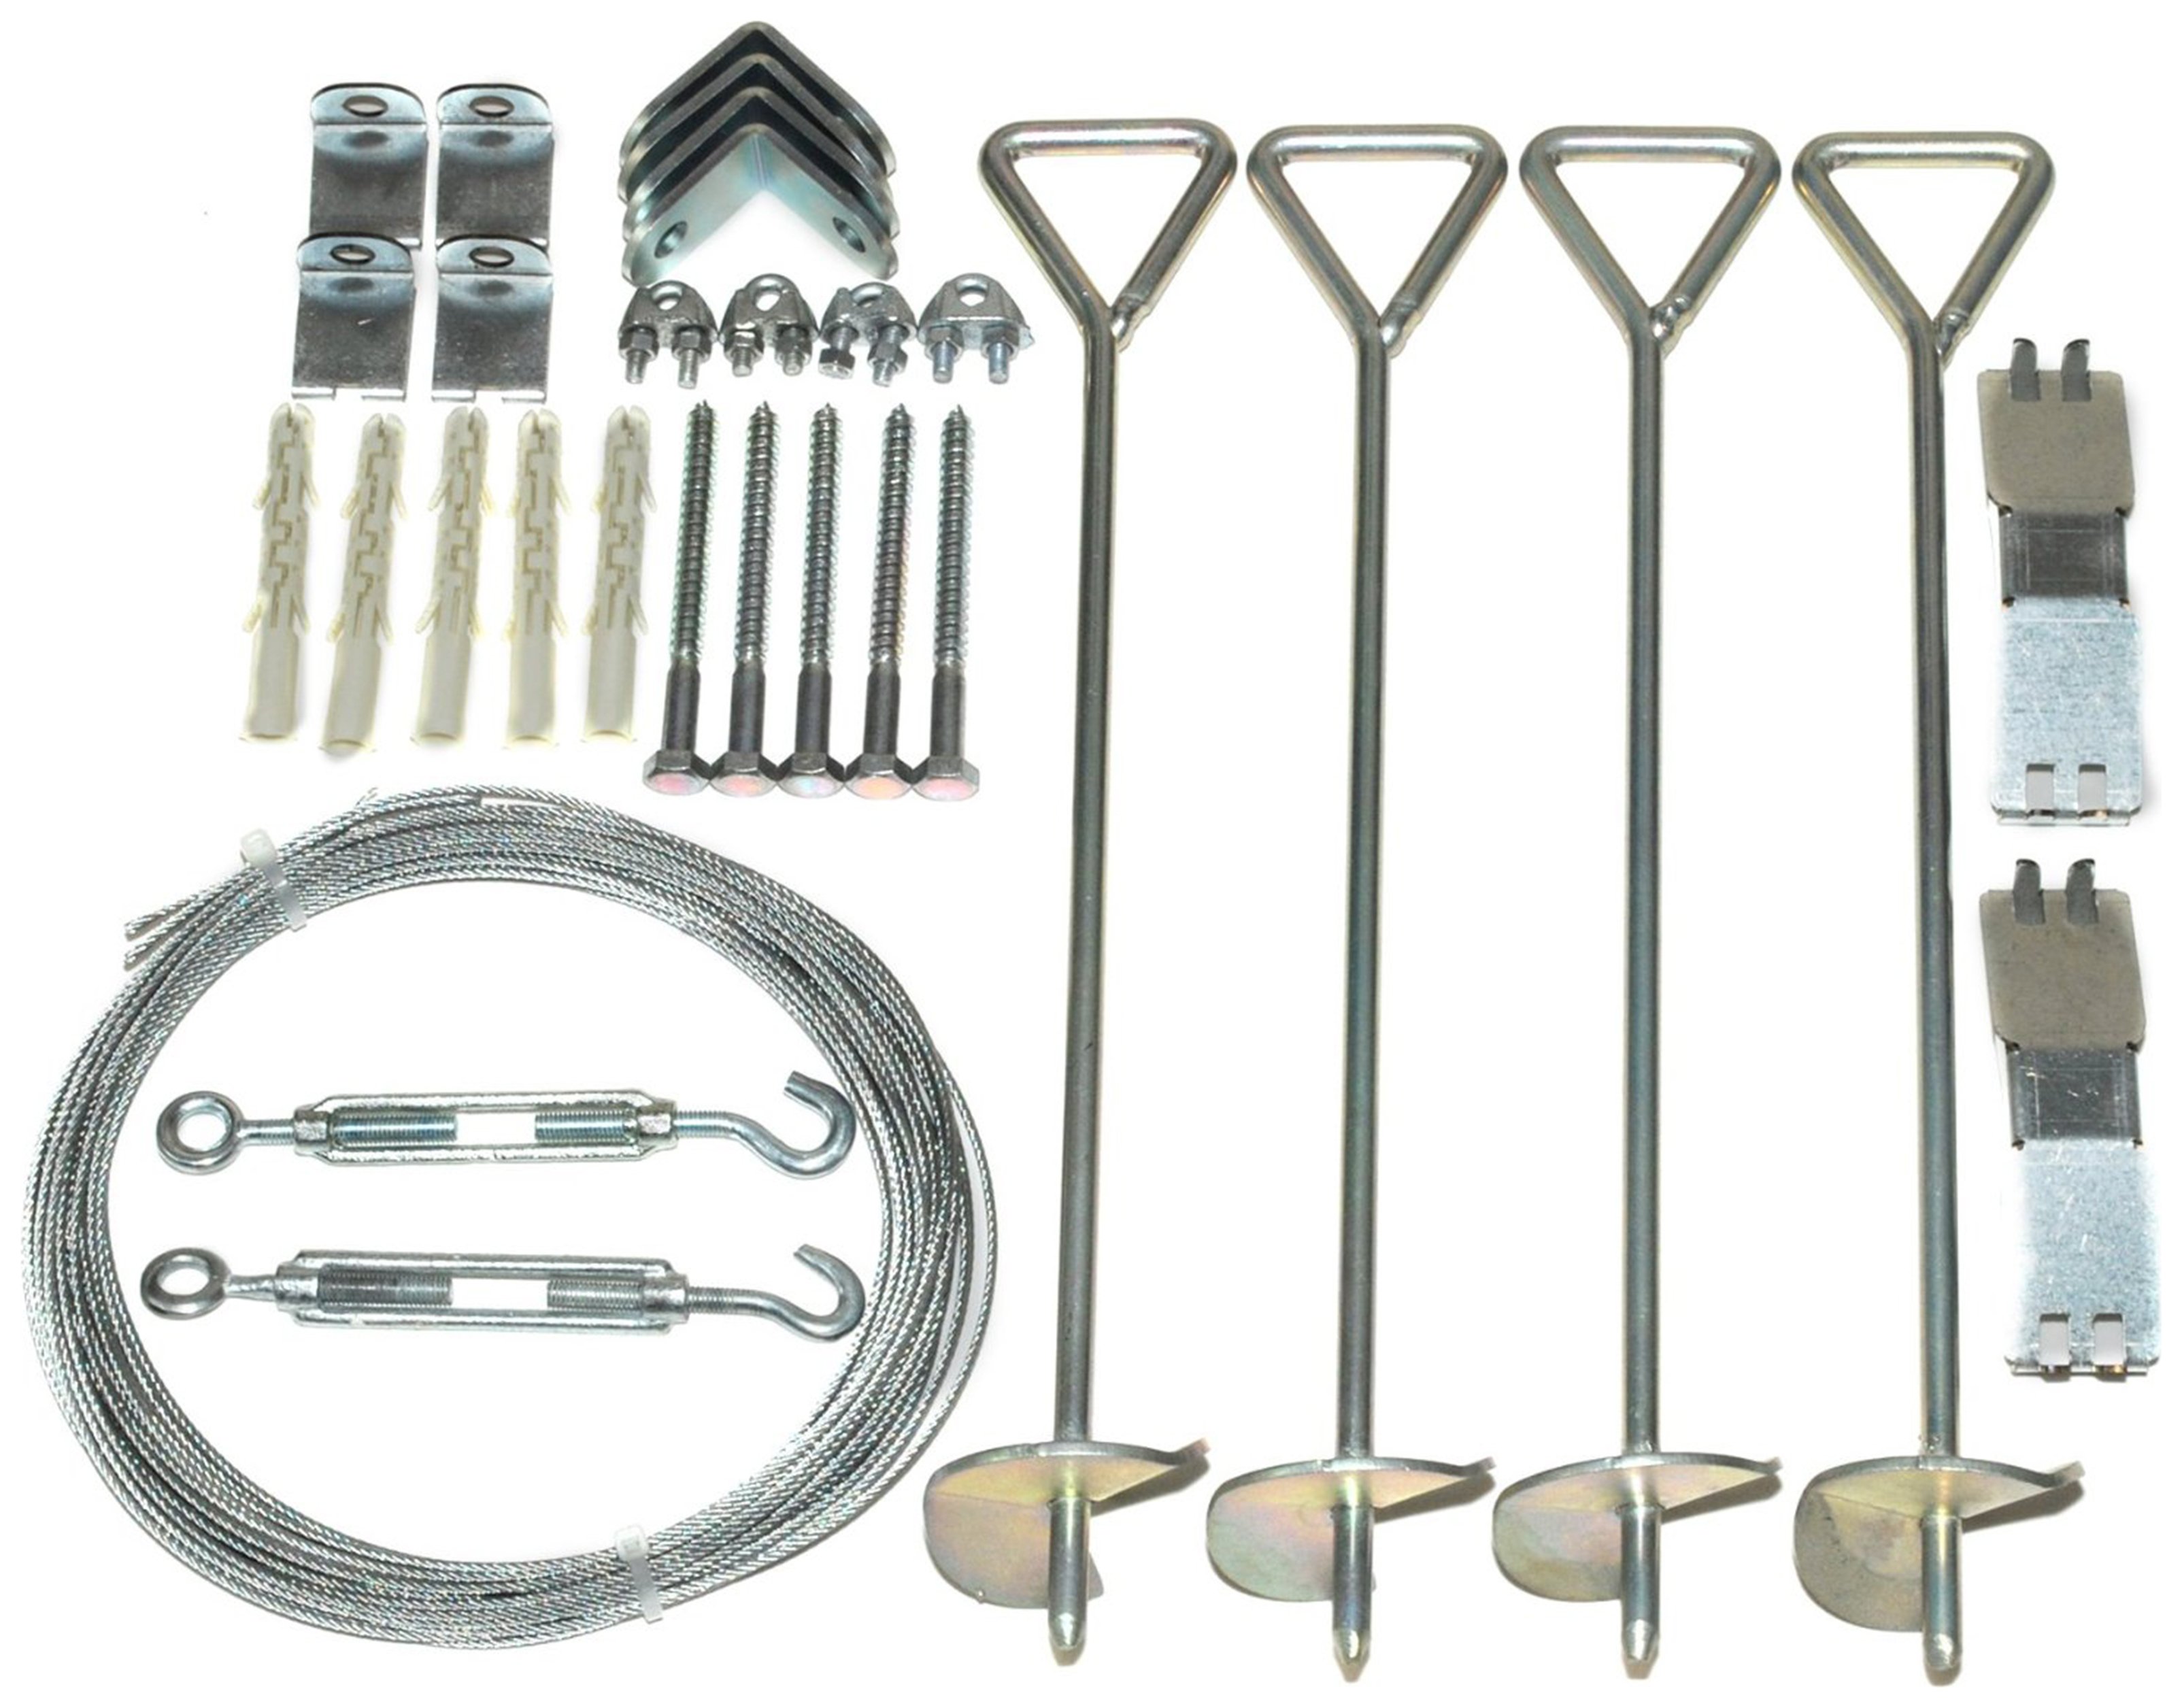 Palram Greenhouse Accessories Anchoring Kit.